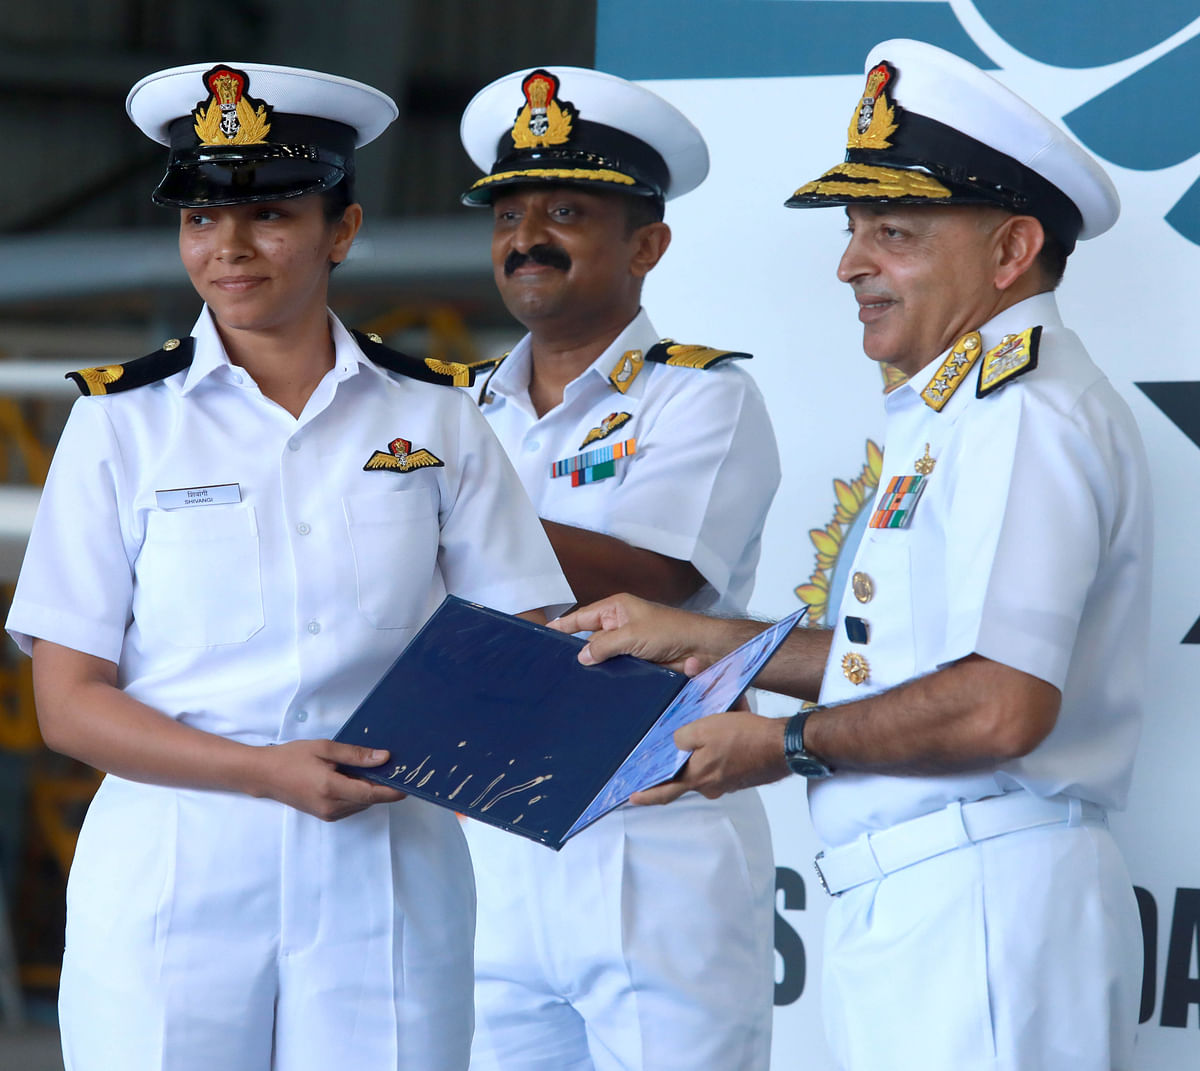 Vice Admiral A K Chawla awarding the wings to Navy's first woman pilot Shivangi at the awarding ofwings ceremony at the Southern Naval Command in Kochi on Monday.